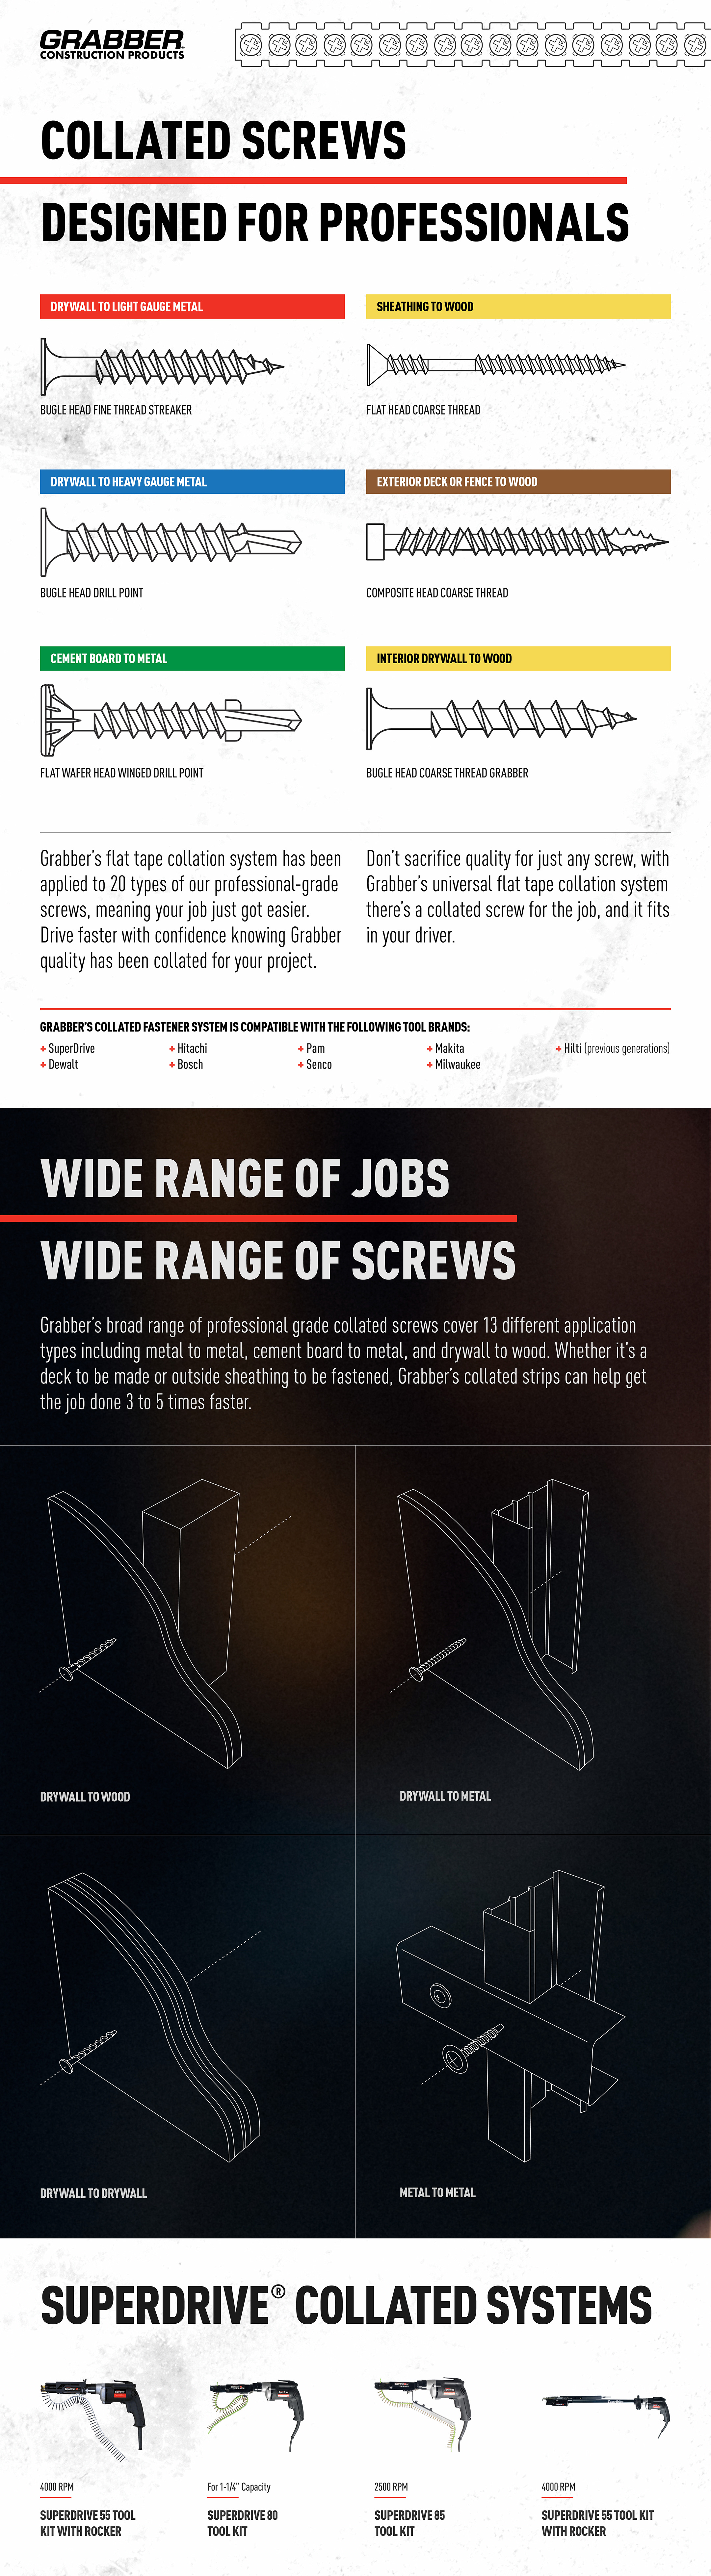 Grabber Collated Screws are Designed for Professionals - Infographic